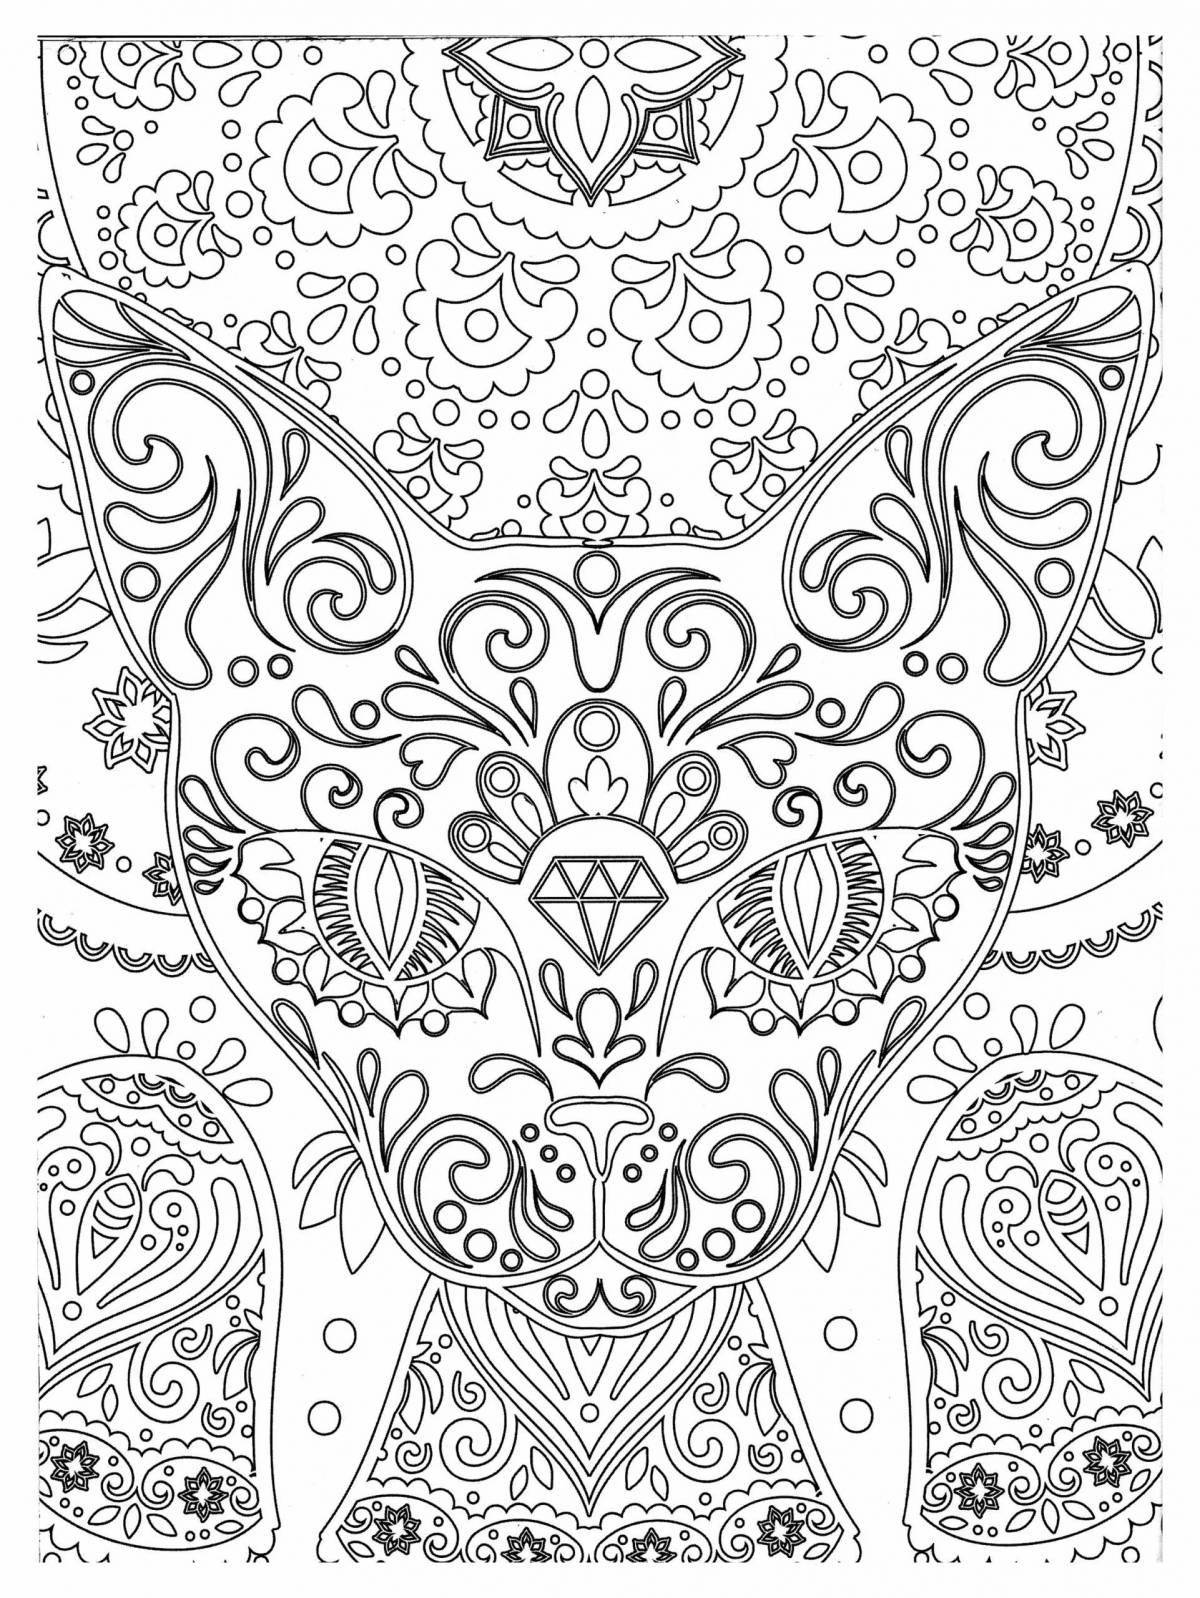 Coloring book with complex pattern